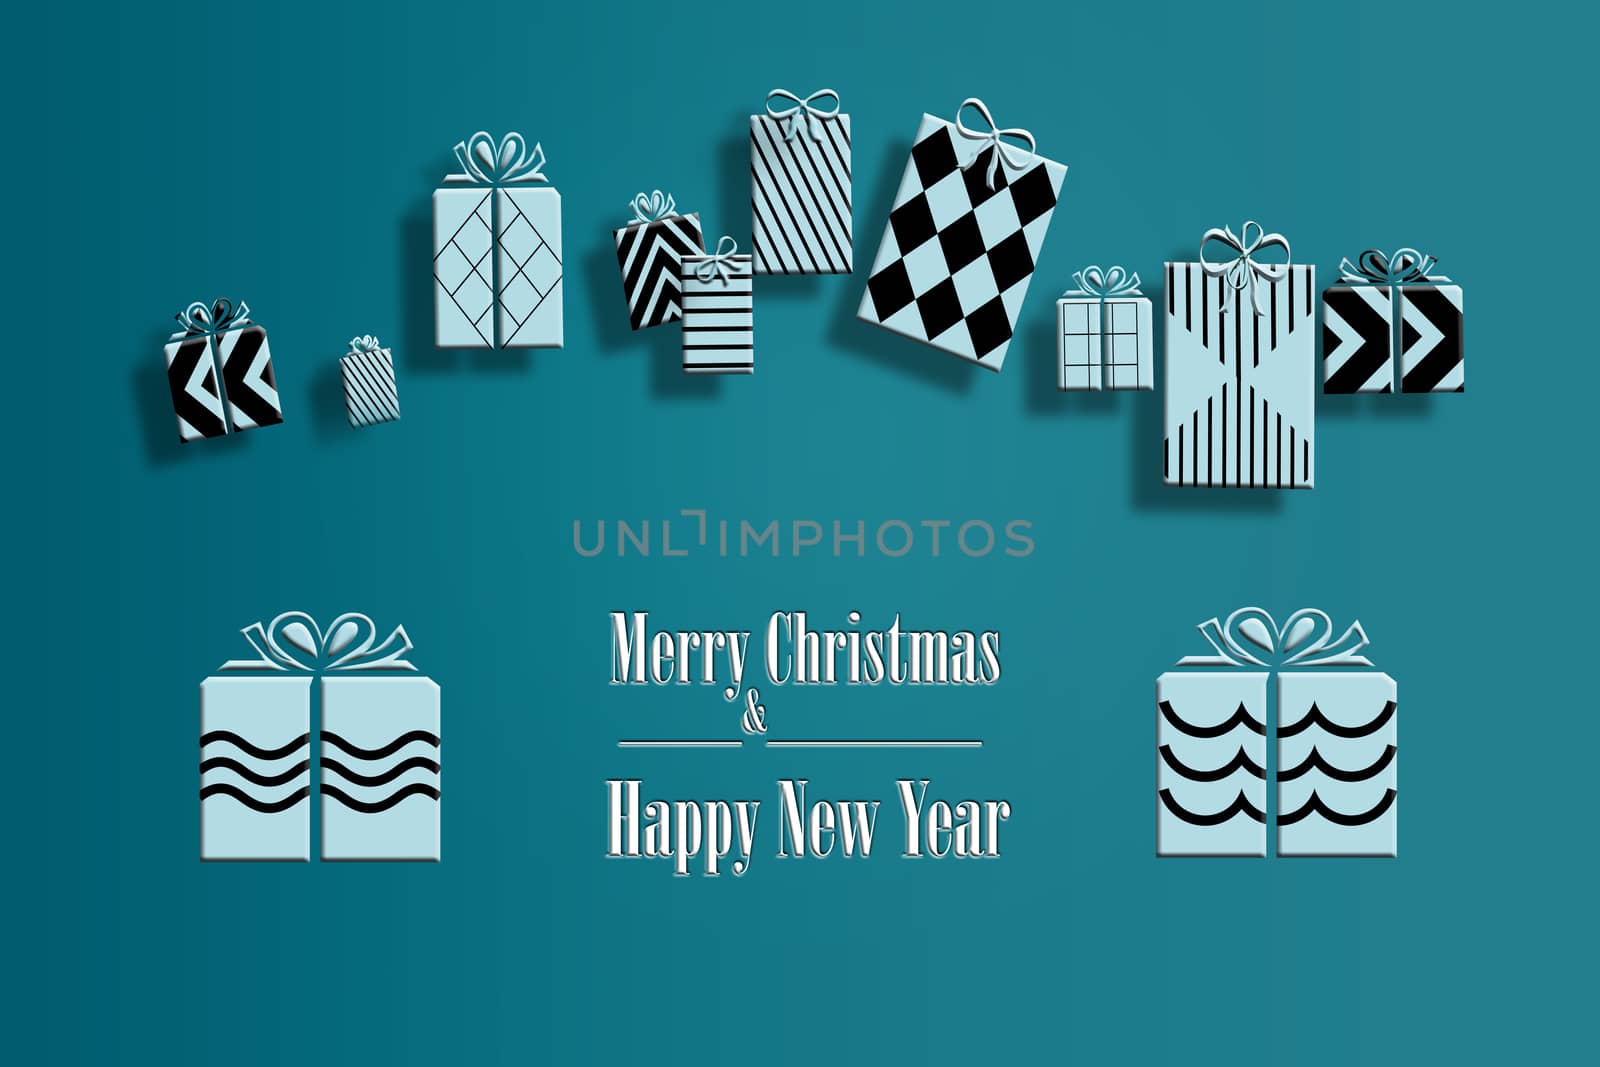 Luxury stylish set of Christmas gift boxes on trendy turquoise blue background and text Merry Christmas and Happy New Year. 3D illustration, mock up, banner